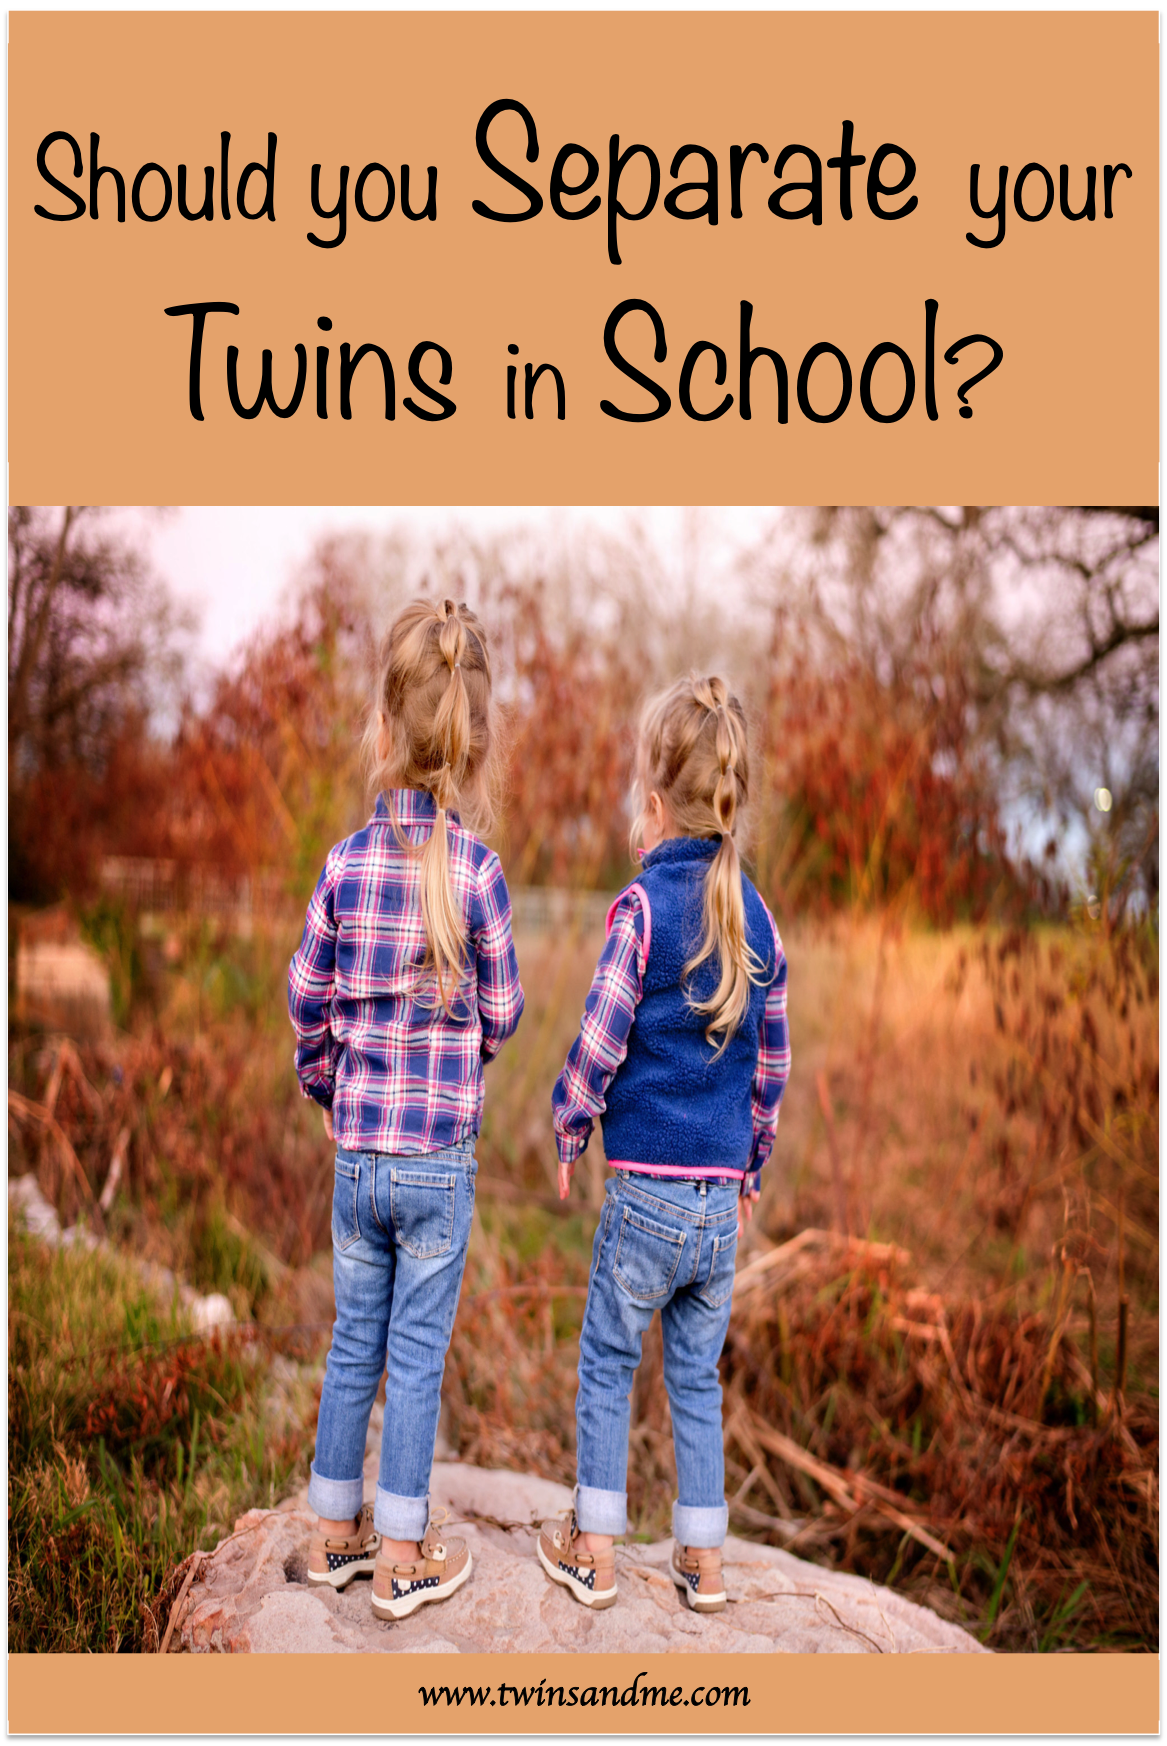 To separate your twins in School is right or wrong? Does this query perplex you? Here are the guidelines that will help you make the right decision.